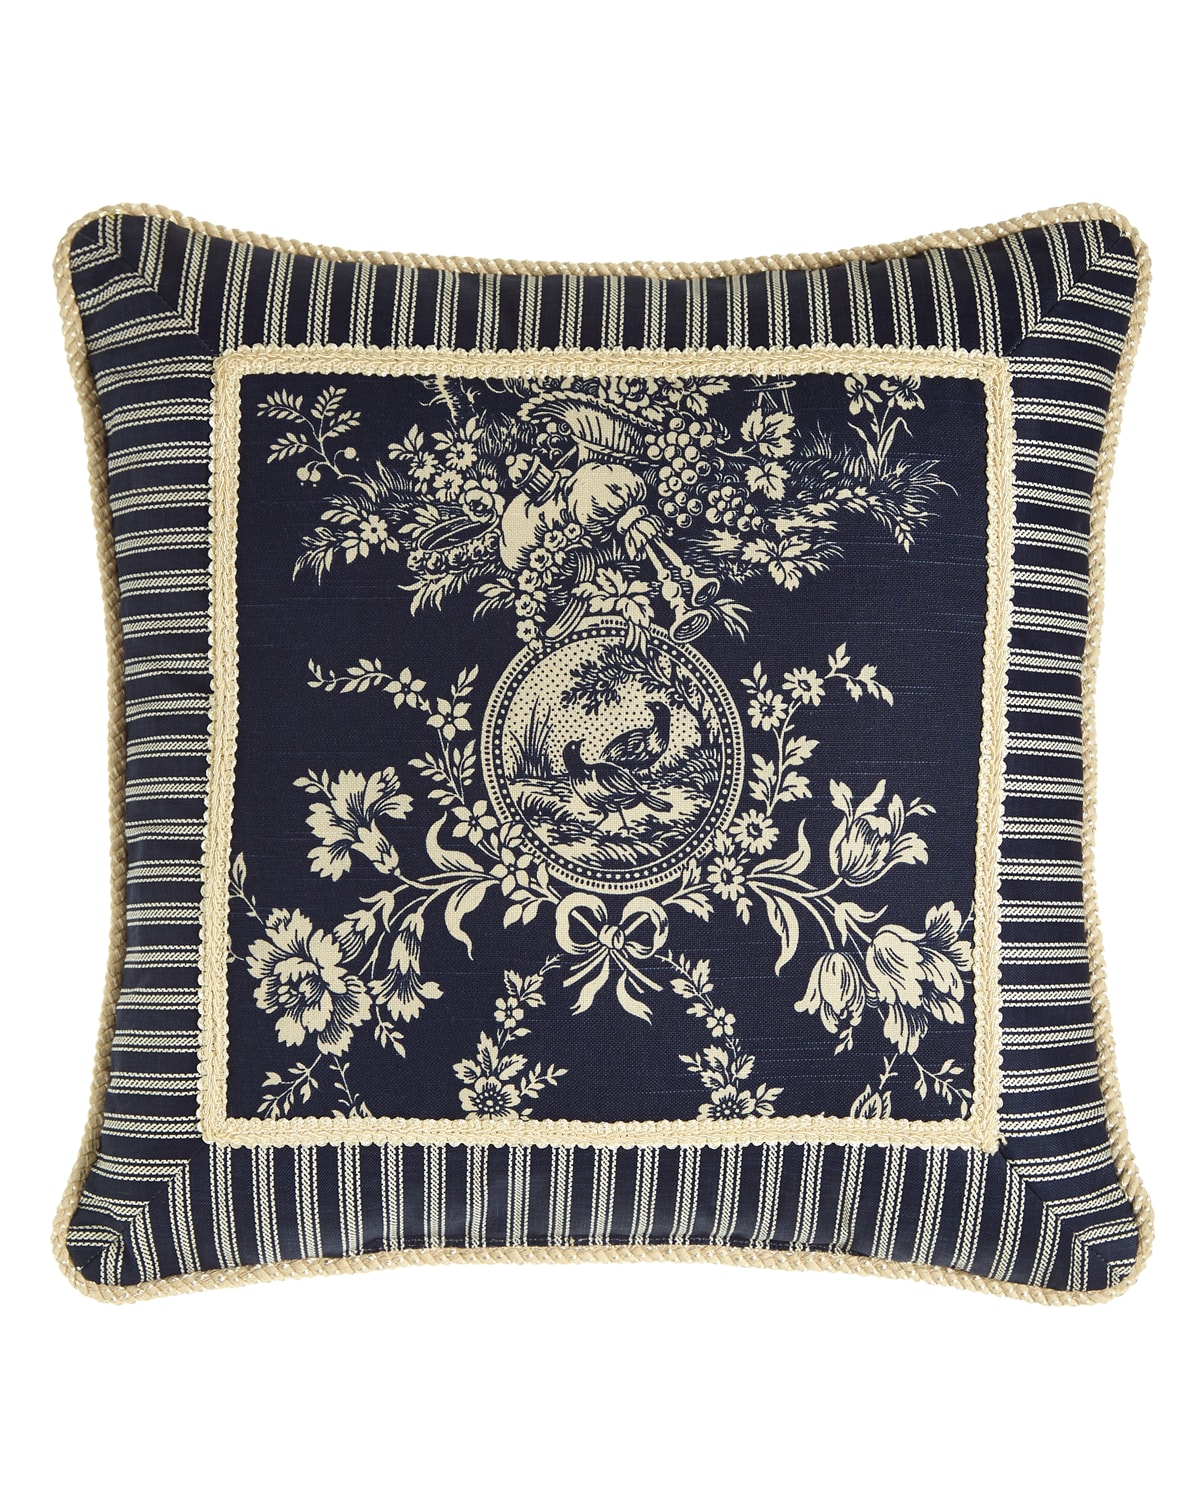 Sherry Kline Home Country Toile Pillow With Striped Frame, 19"sq. In Blue